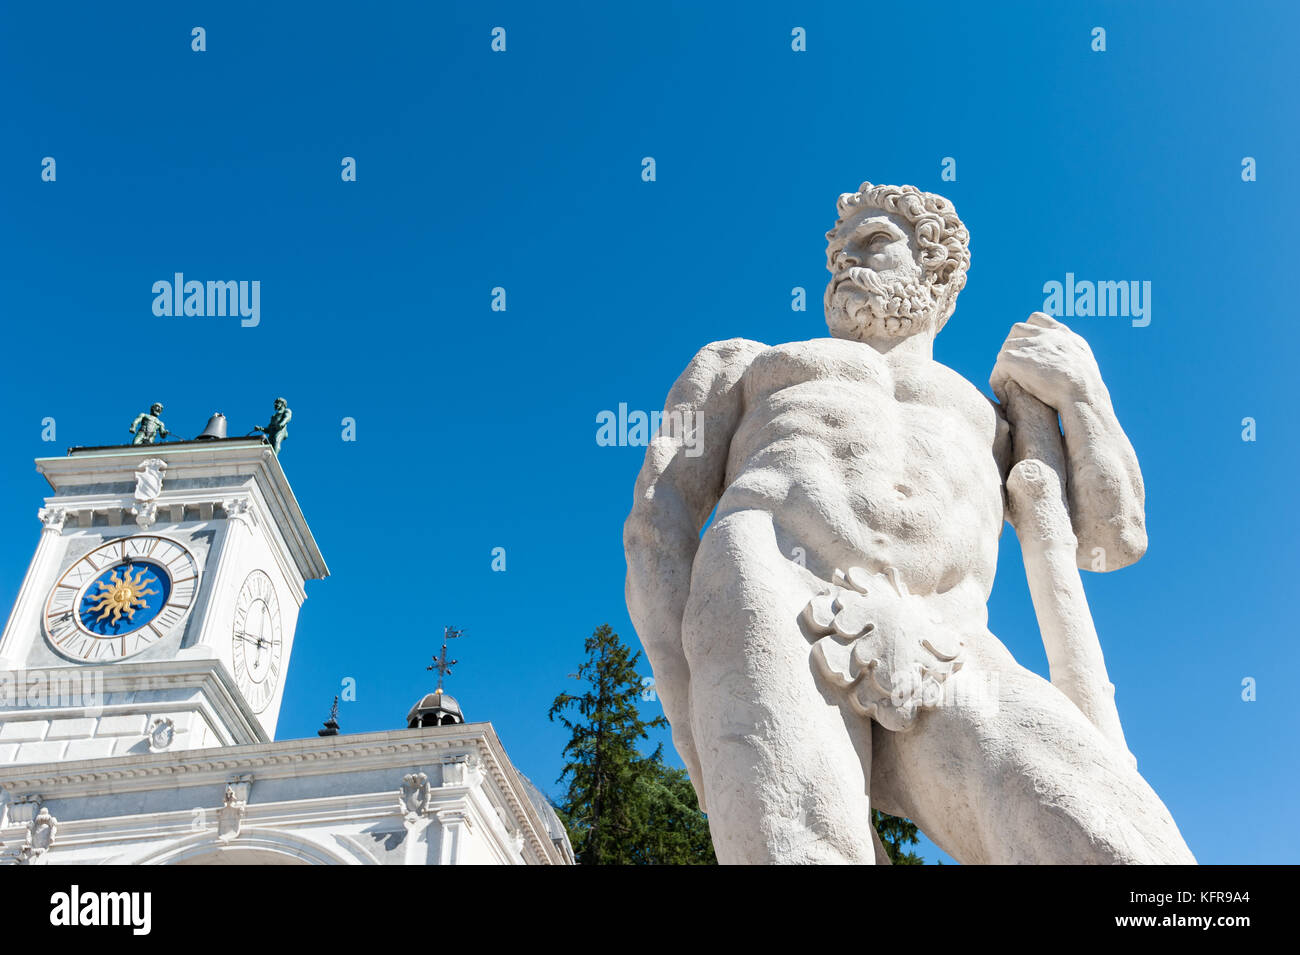 Statue of the 16 century. Statue of Hercules. Medieval art. Udine,Italy Stock Photo